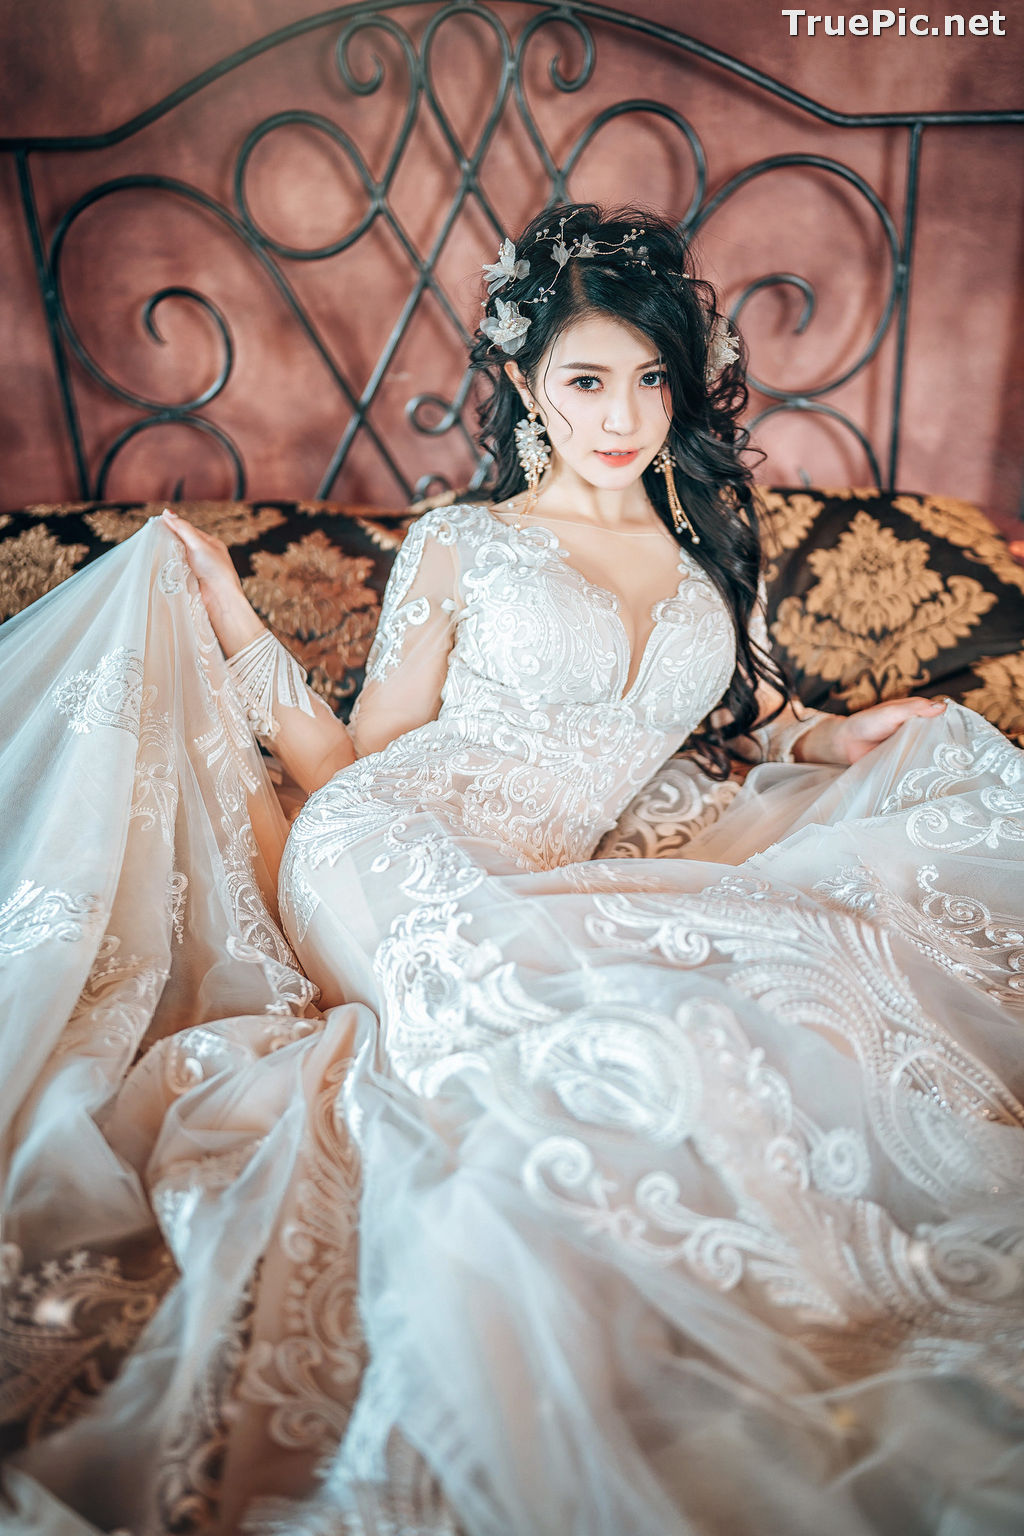 Image Taiwanese Model – 珈伊Femi - Mischievous Sexy and Beautiful Bride - TruePic.net - Picture-33